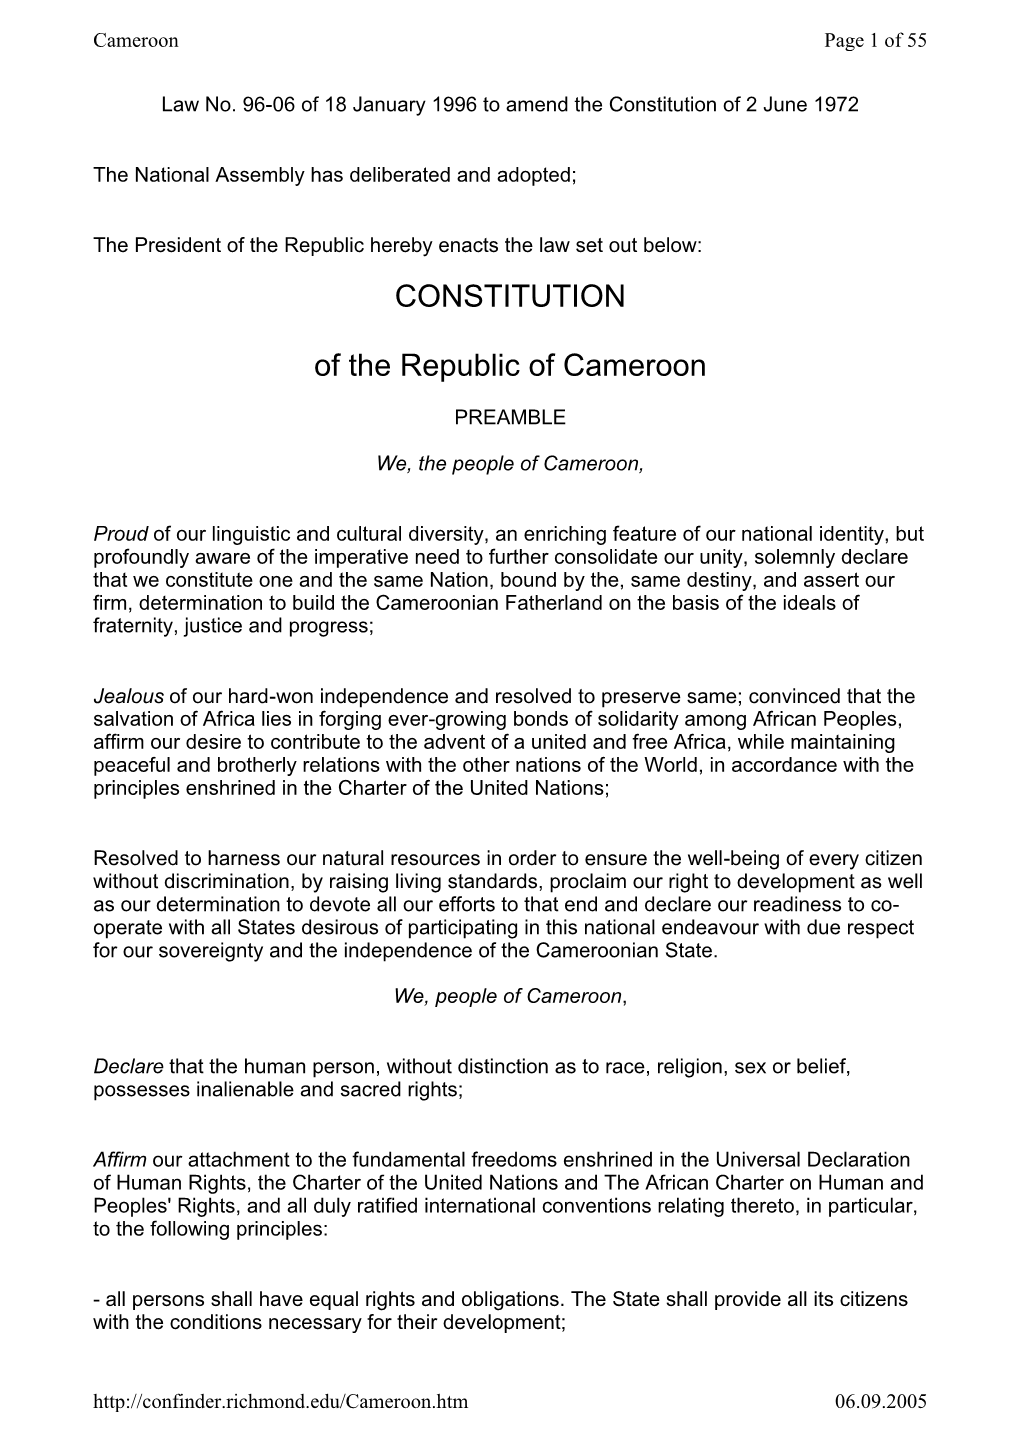 Constitution of the Republic of Cameroon